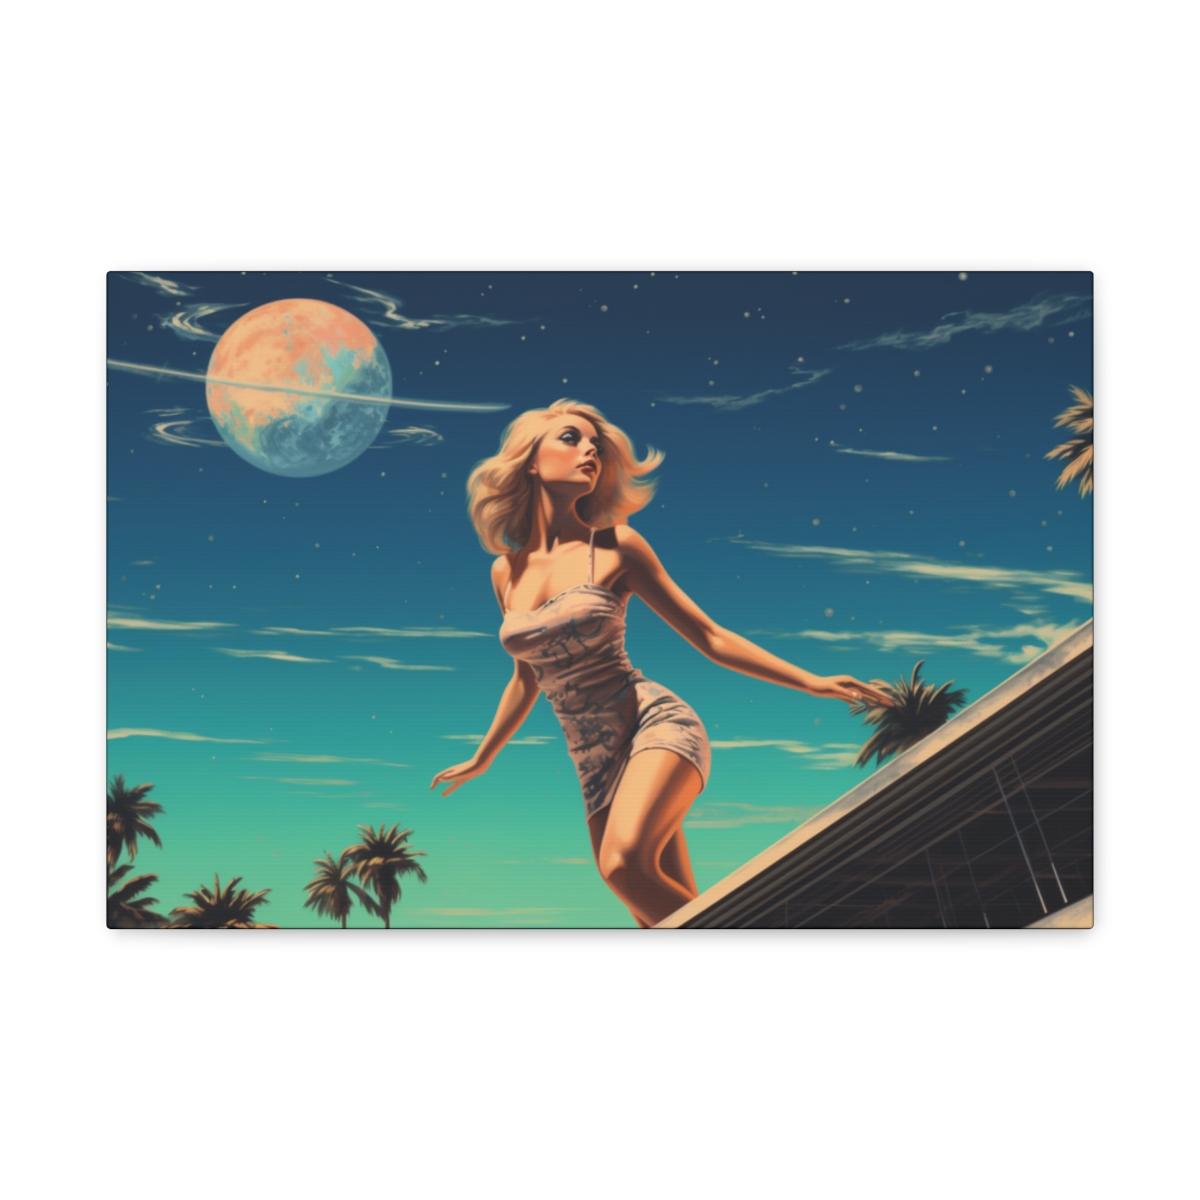 Retro Space Art Canvas Print: Pool Party By The Galaxy